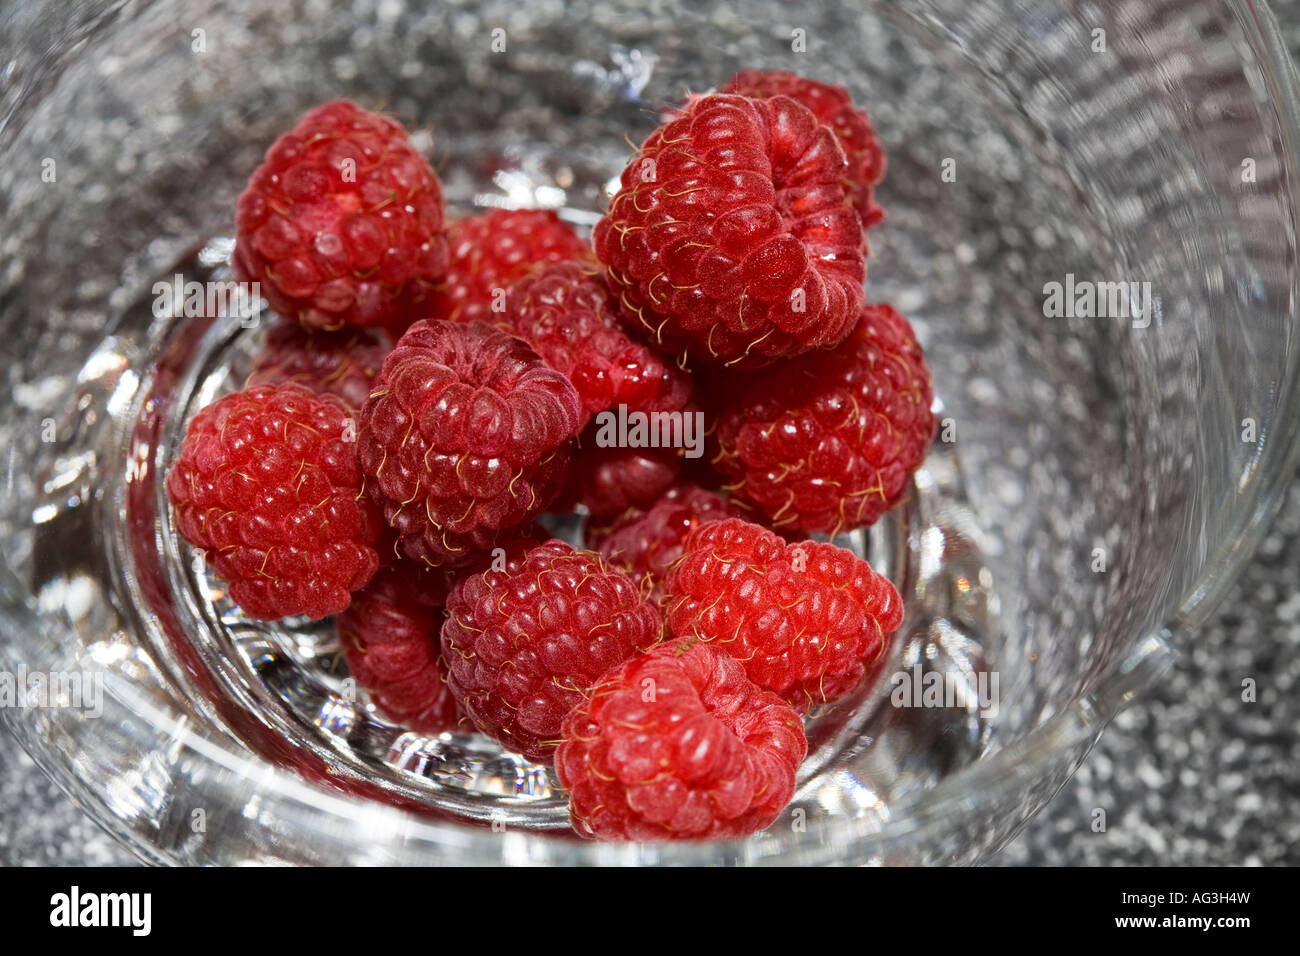 A Bowl of Red Raspberries A close up shot of a glass bowl of fresh plump red ripe raspberries against a grey background Stock Photo